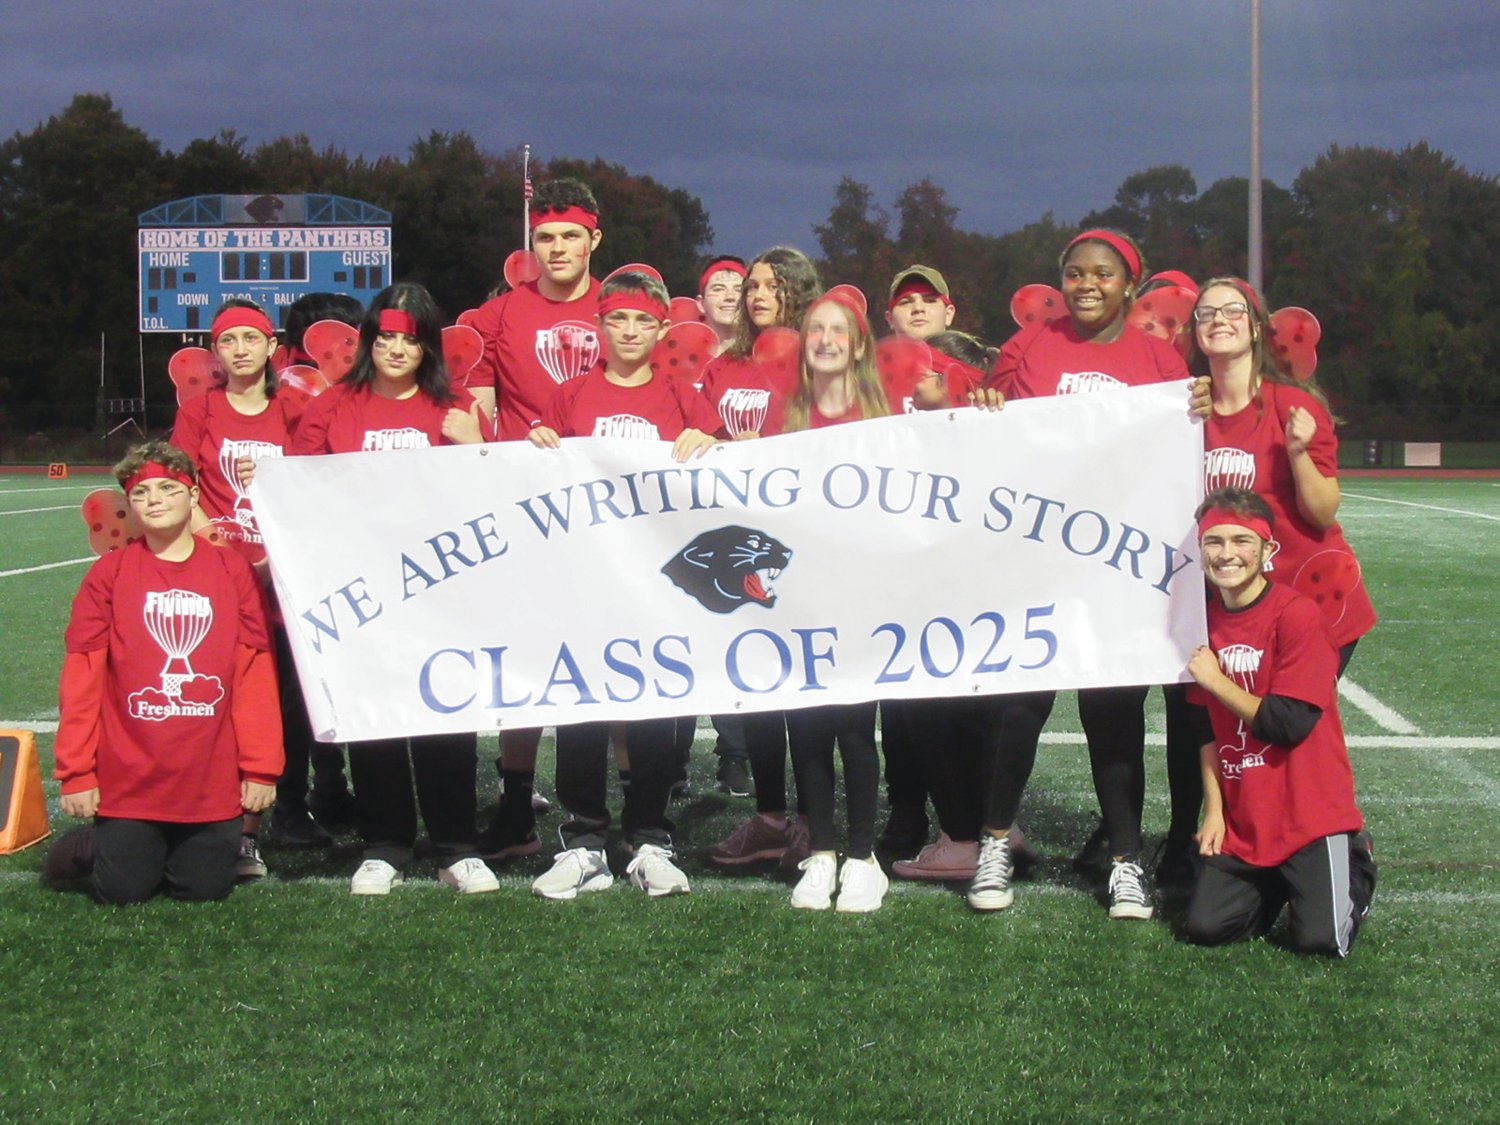 FLYING FROSH: The Class of 2025 came up with “We are writing our story” for the “Battle of the Classes” last week.